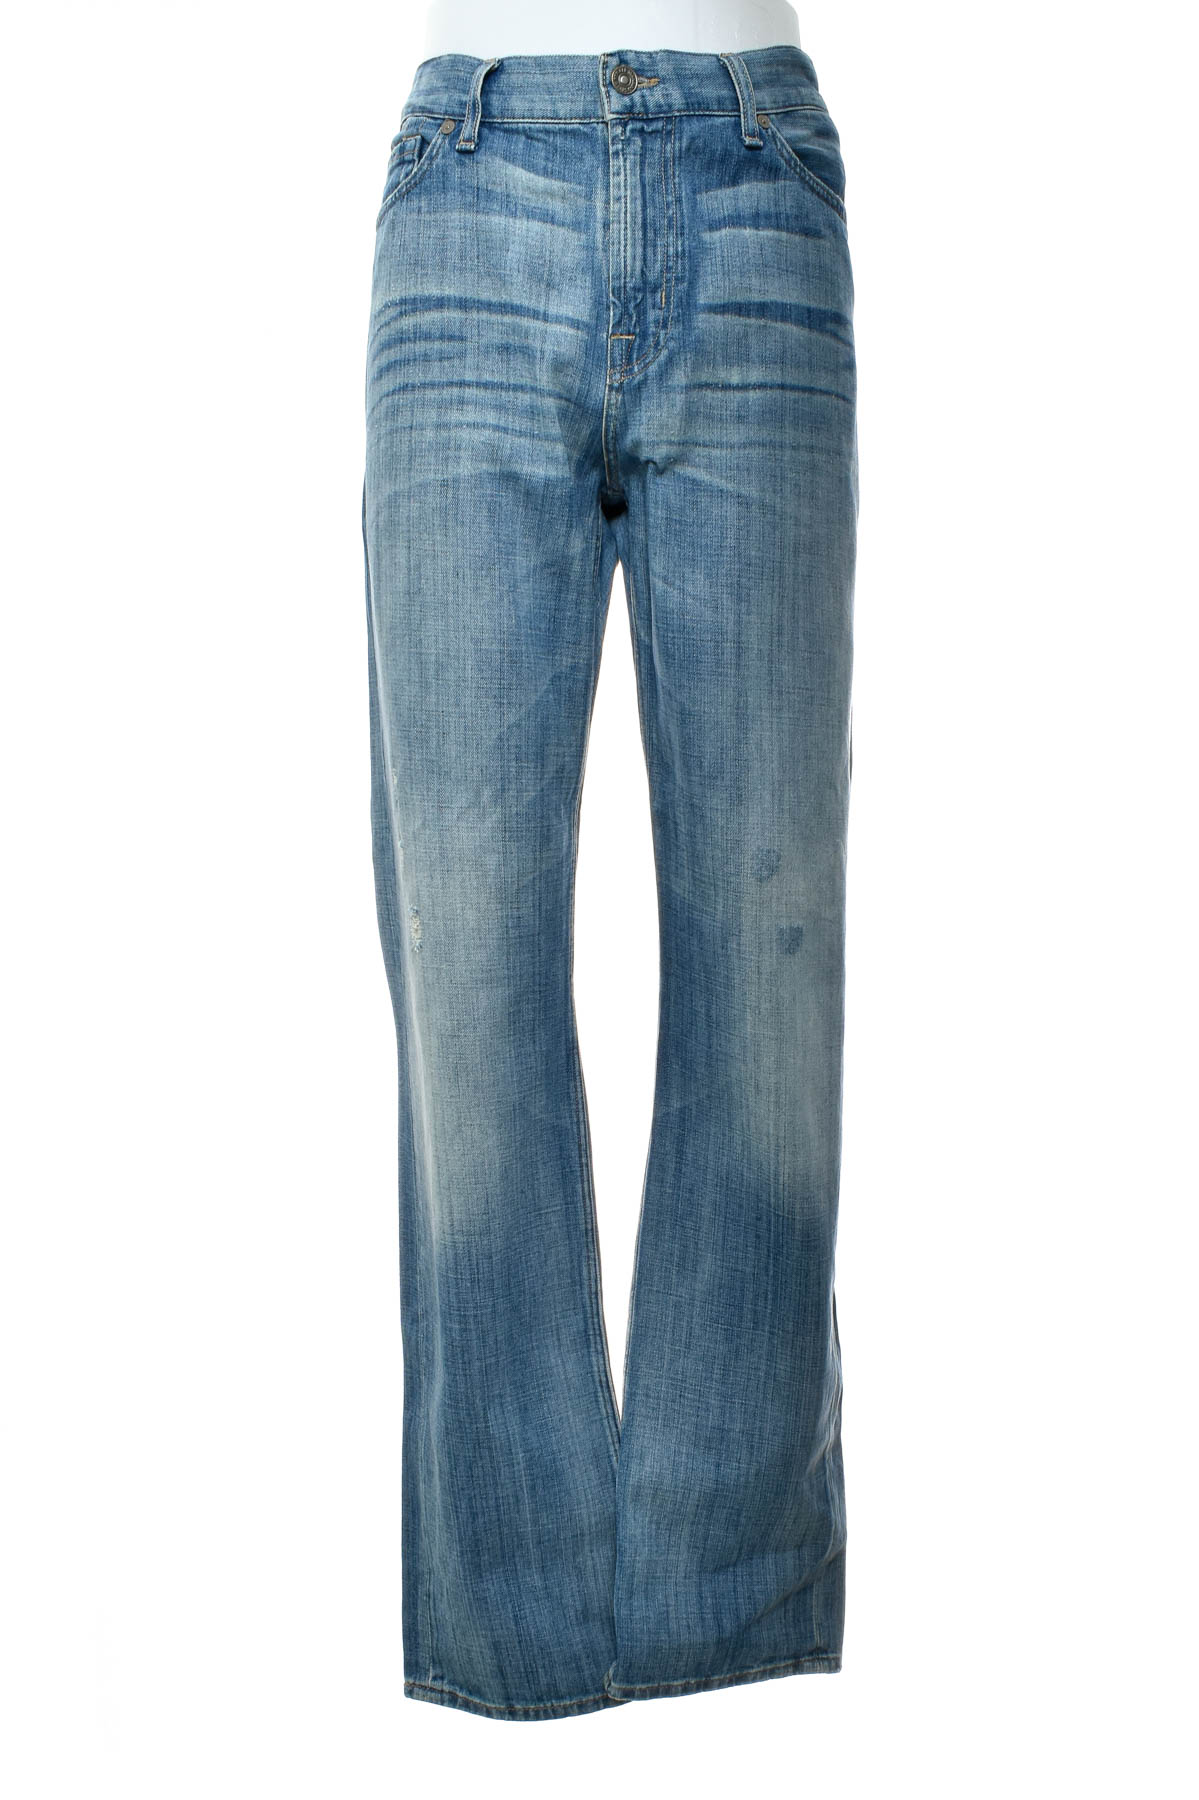 Men's jeans - 7 For All Mankind - 0